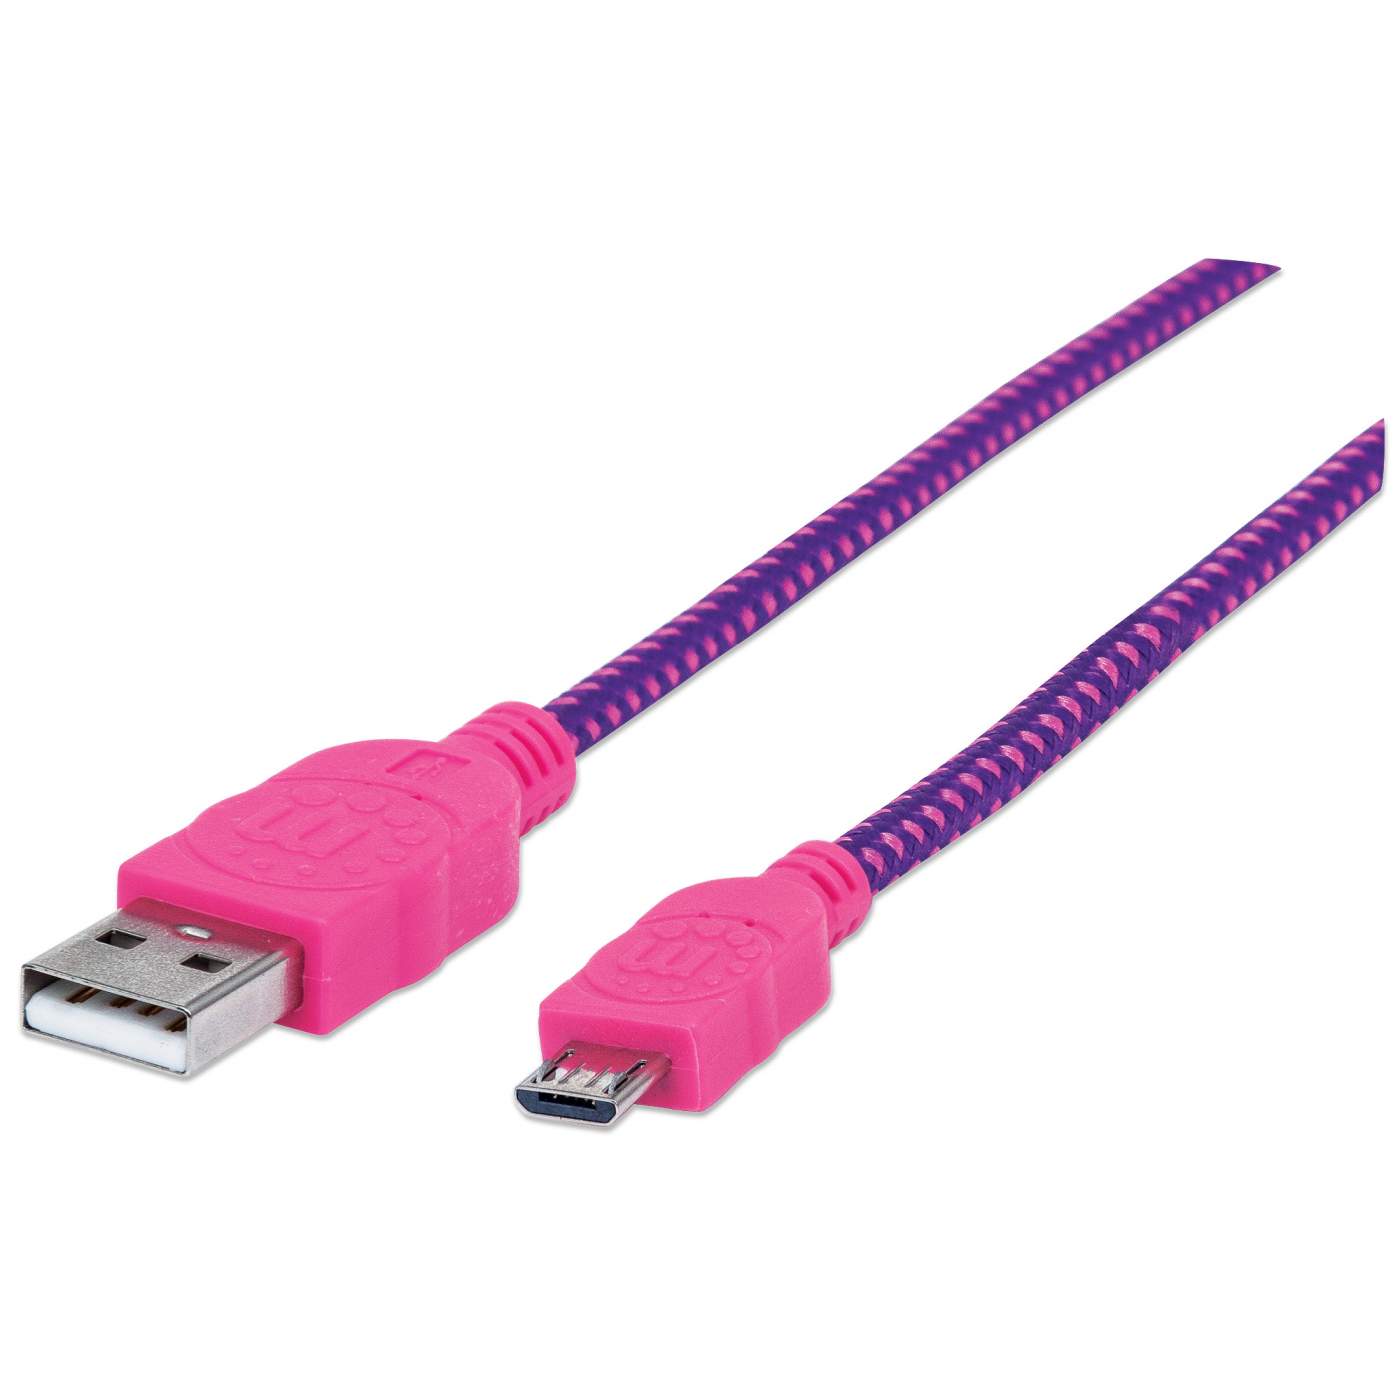 USB C 3.0 CABLE, 5 FTCB4054BK